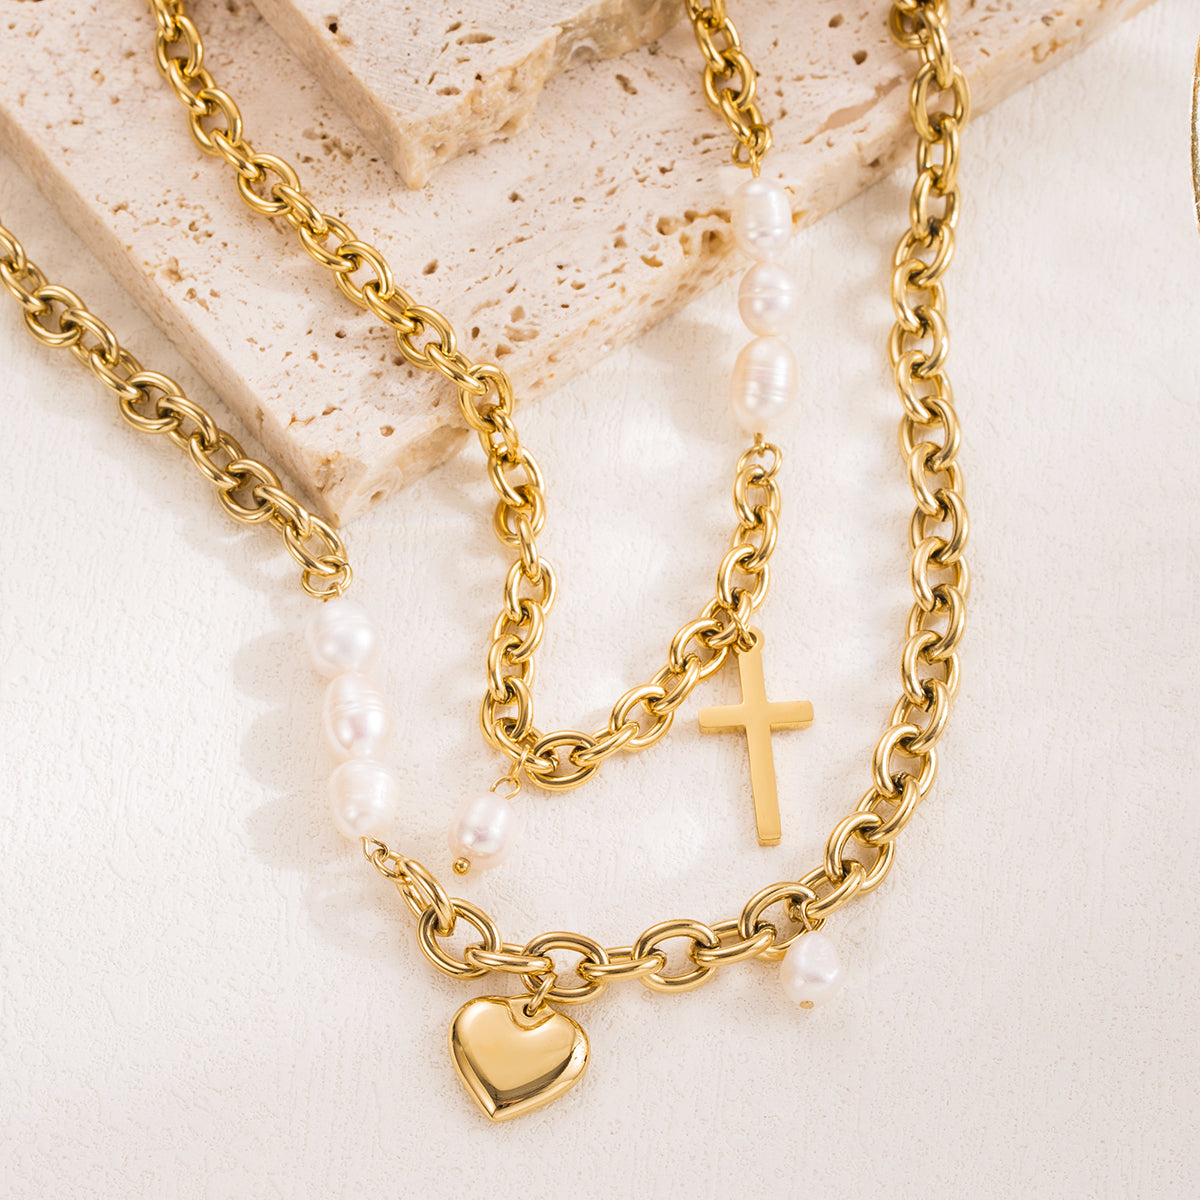 Stainless Steel Love or Cross Pendant Necklace With Pearls